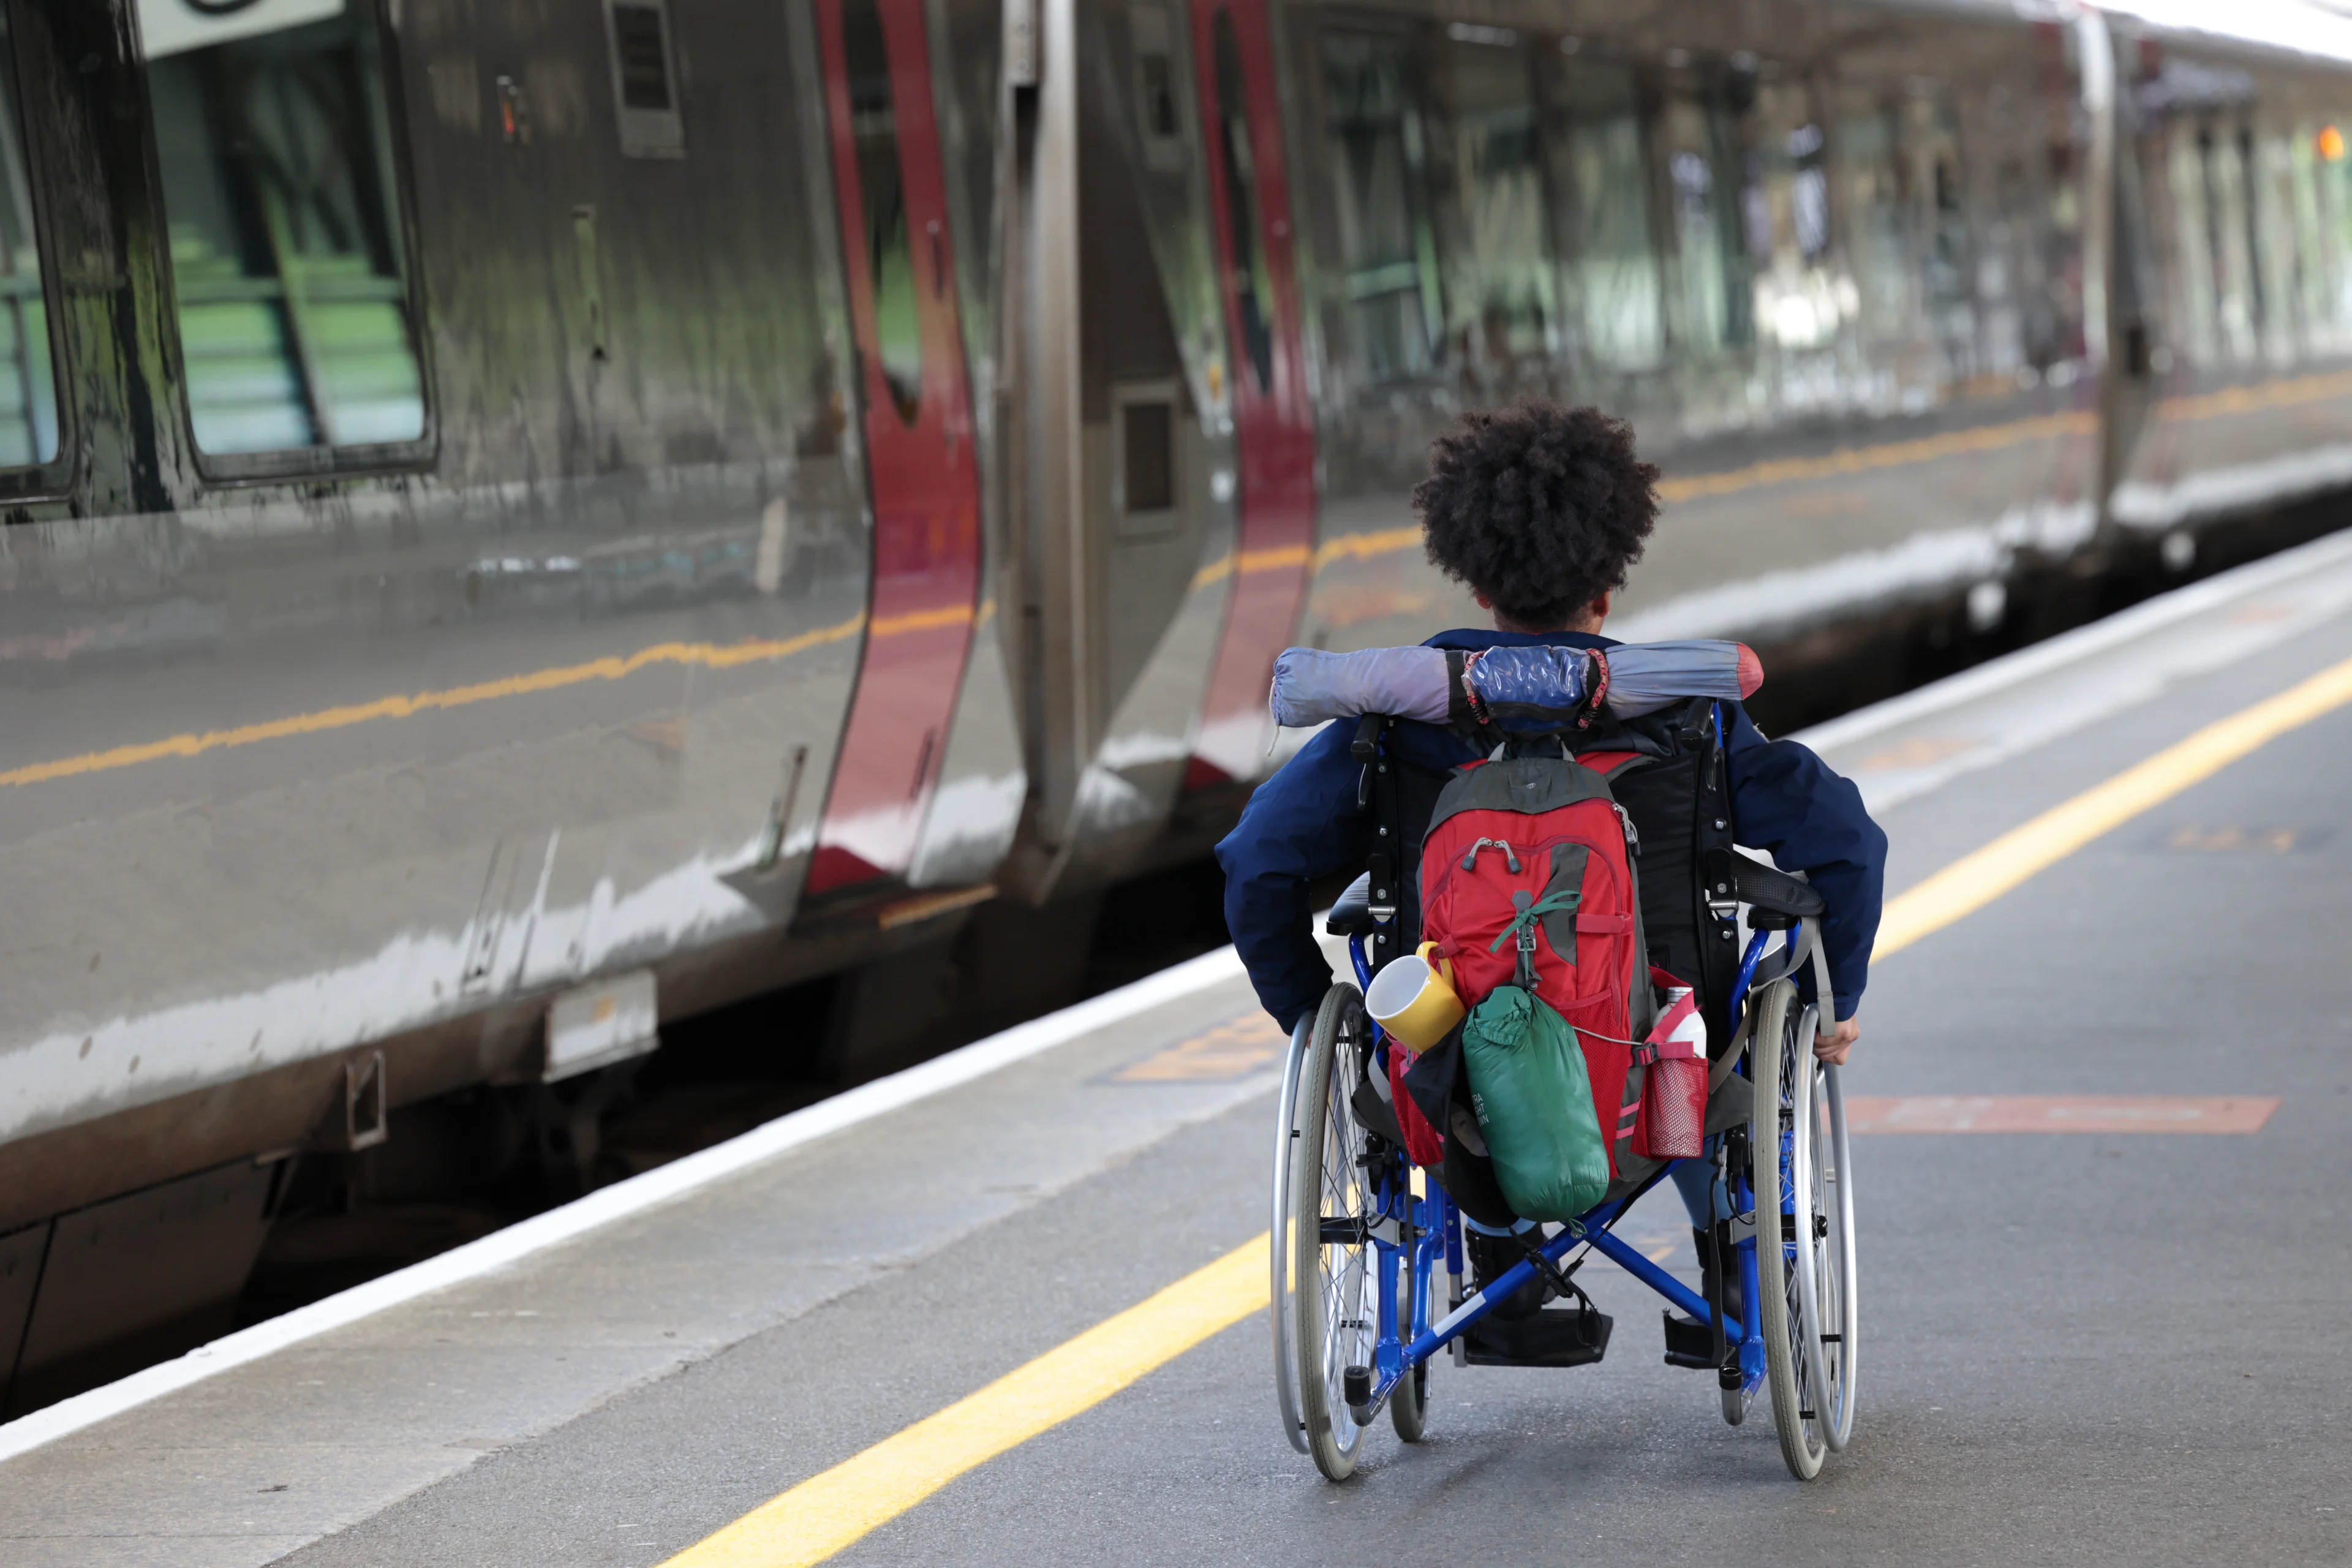 A woman in a wheelchair with camping equipment on the back wheels herself down a train platform with a train standing next to it.